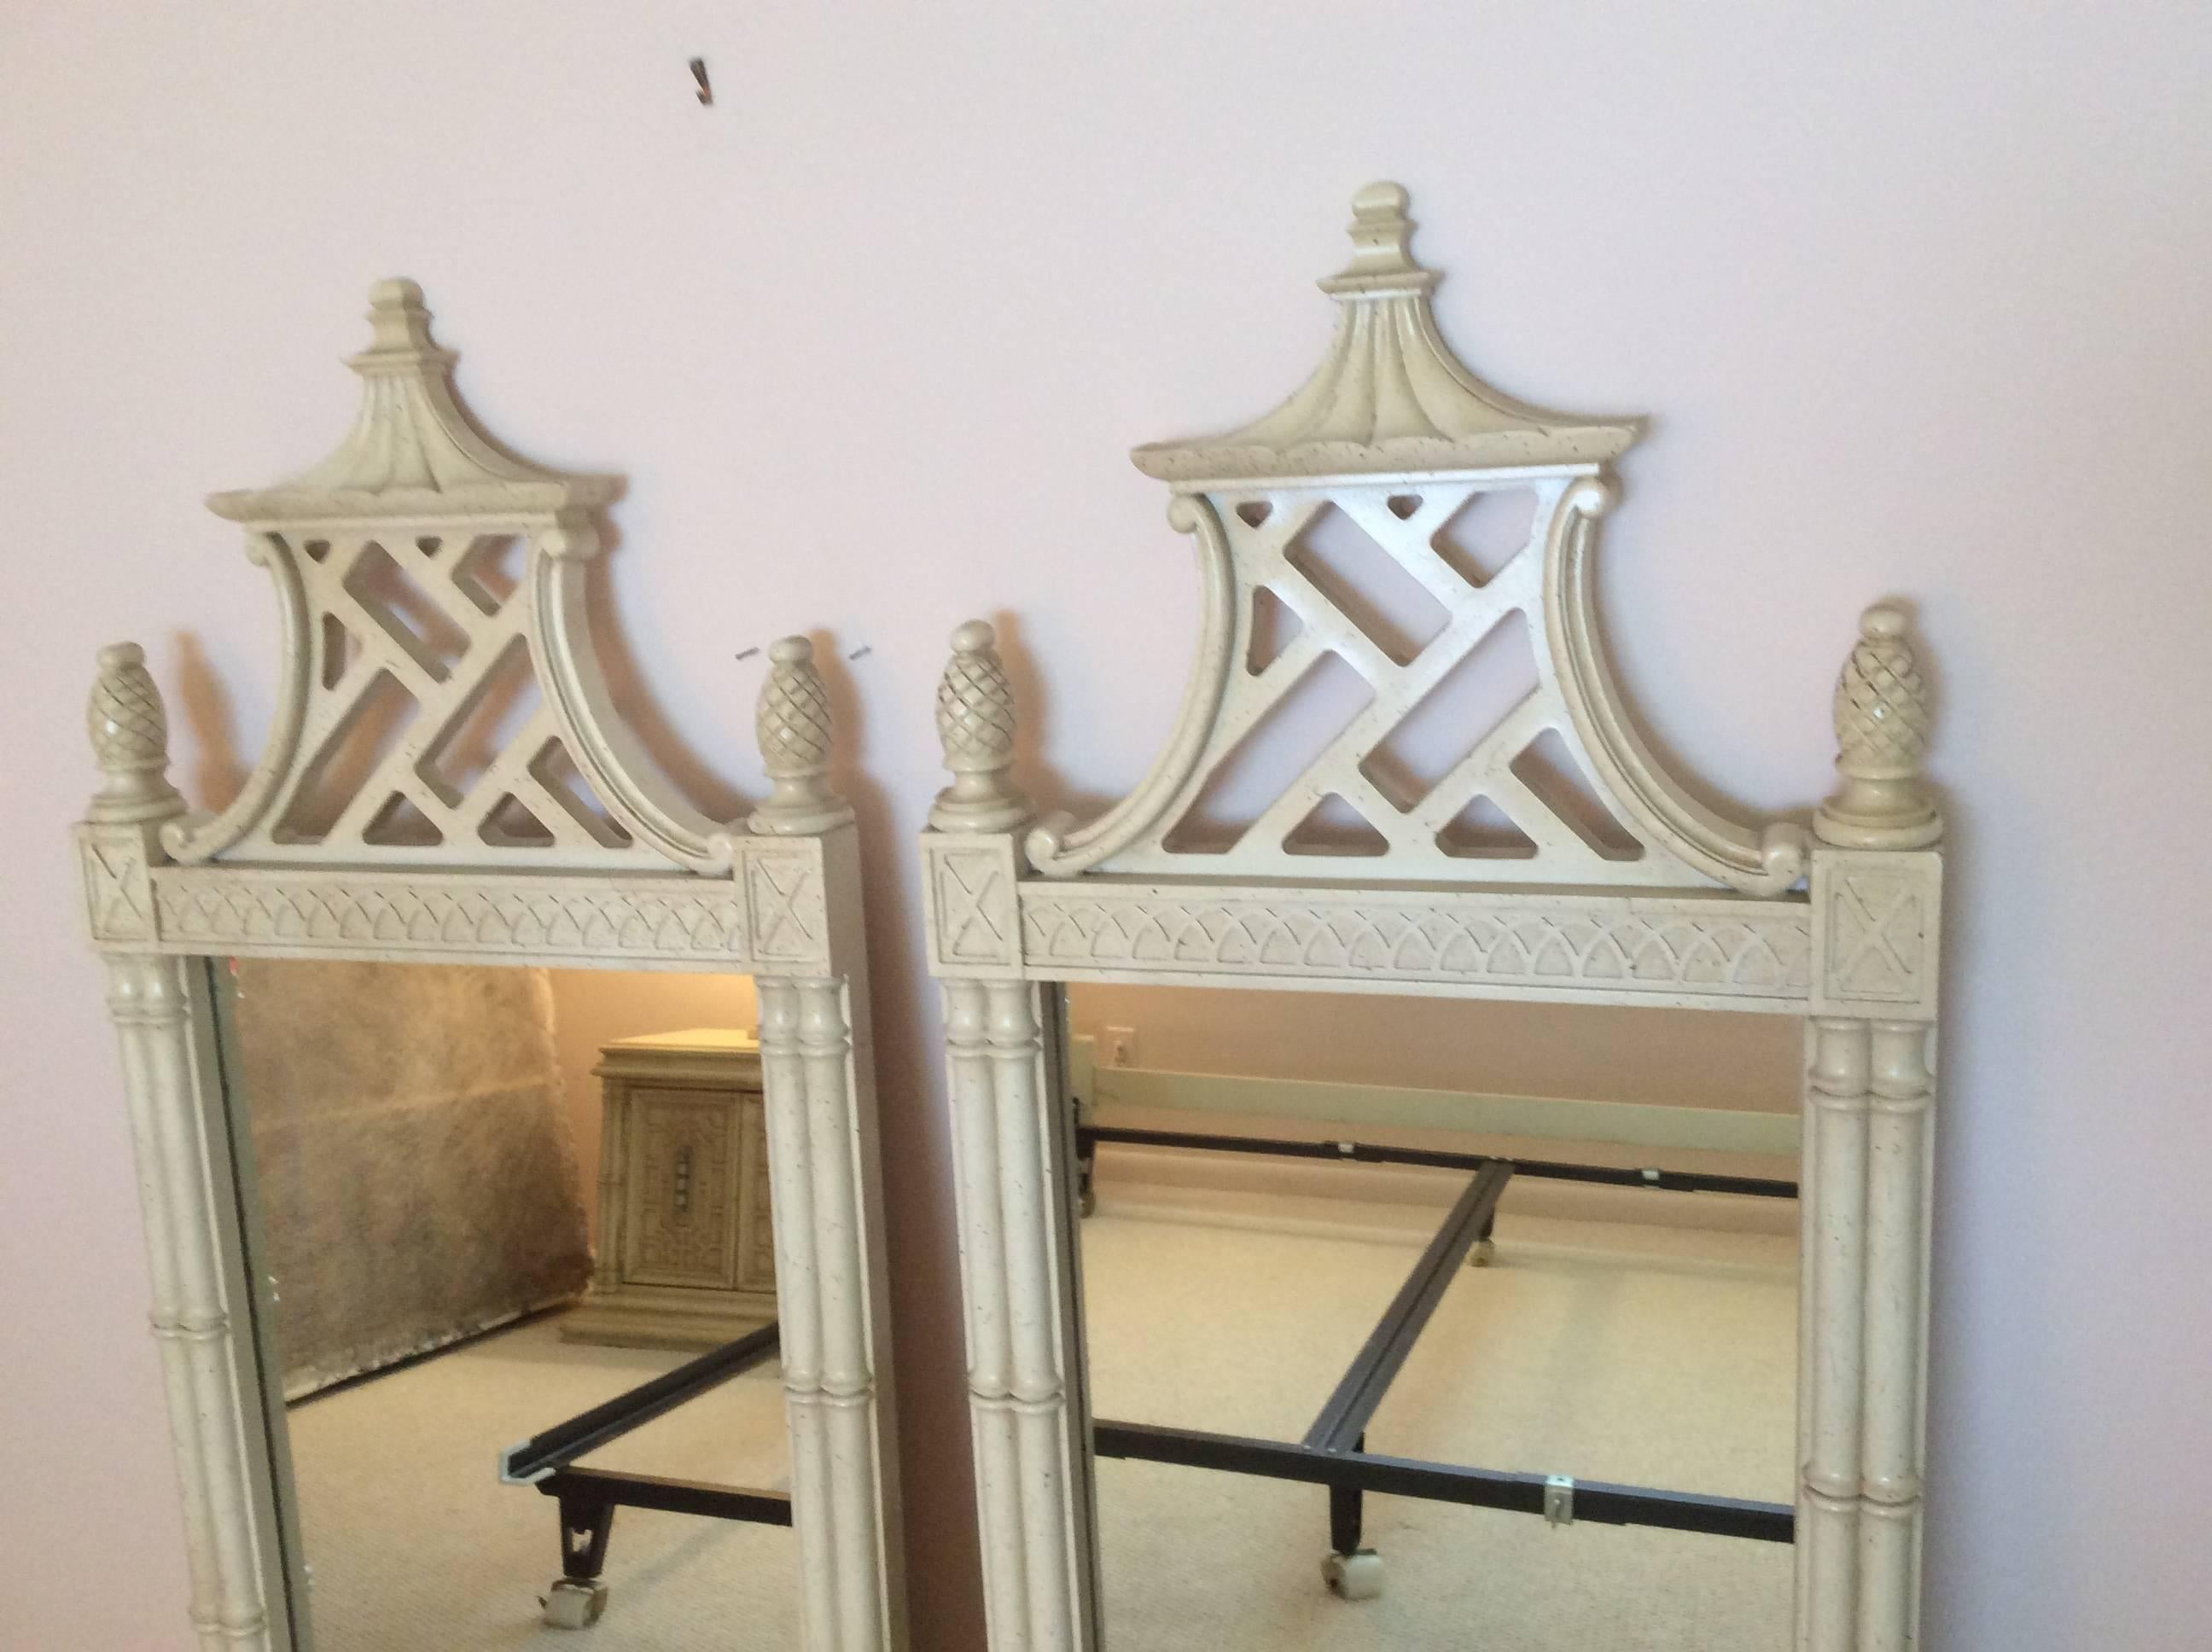 Amazing vintage pair of very rare, hard to find Thomasville pagoda wall mirrors with faux bamboo, pineapple finials and fretwork details. These are NEWLY professionally LACQUERED in a gloss white. 
Faux bamboo, Chinese Chippendale, Palm Beach,